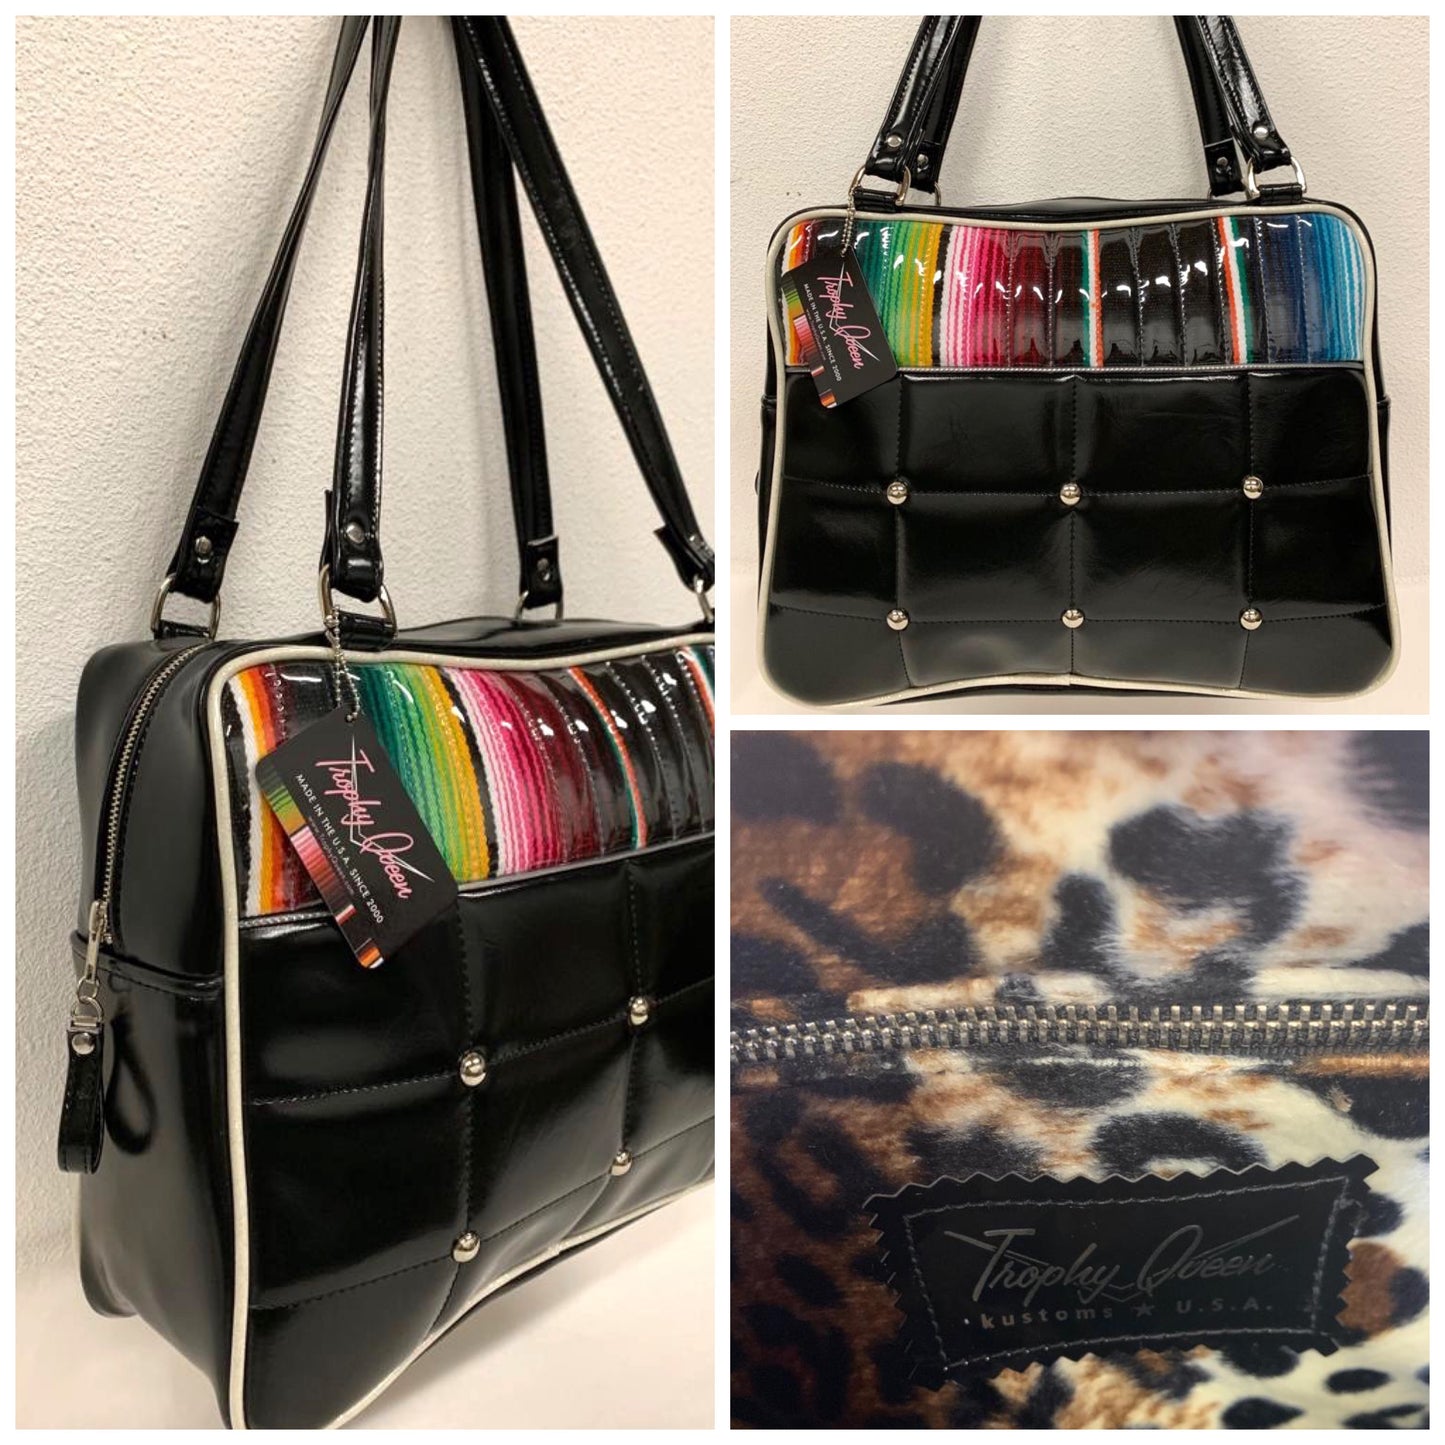 Lincoln Business Bag in Grease Black and Mexican Blanket with Clear Overlay and Plush Leopard Lining. The straps are 29” with nickel hardware and come with extra replacement straps! Inside has an open divided pocket and zipper pocket with hidden serial number. Tote comes with vinyl zipper pull, nickel fee and signature Trophy Queen label. Made with love in California.